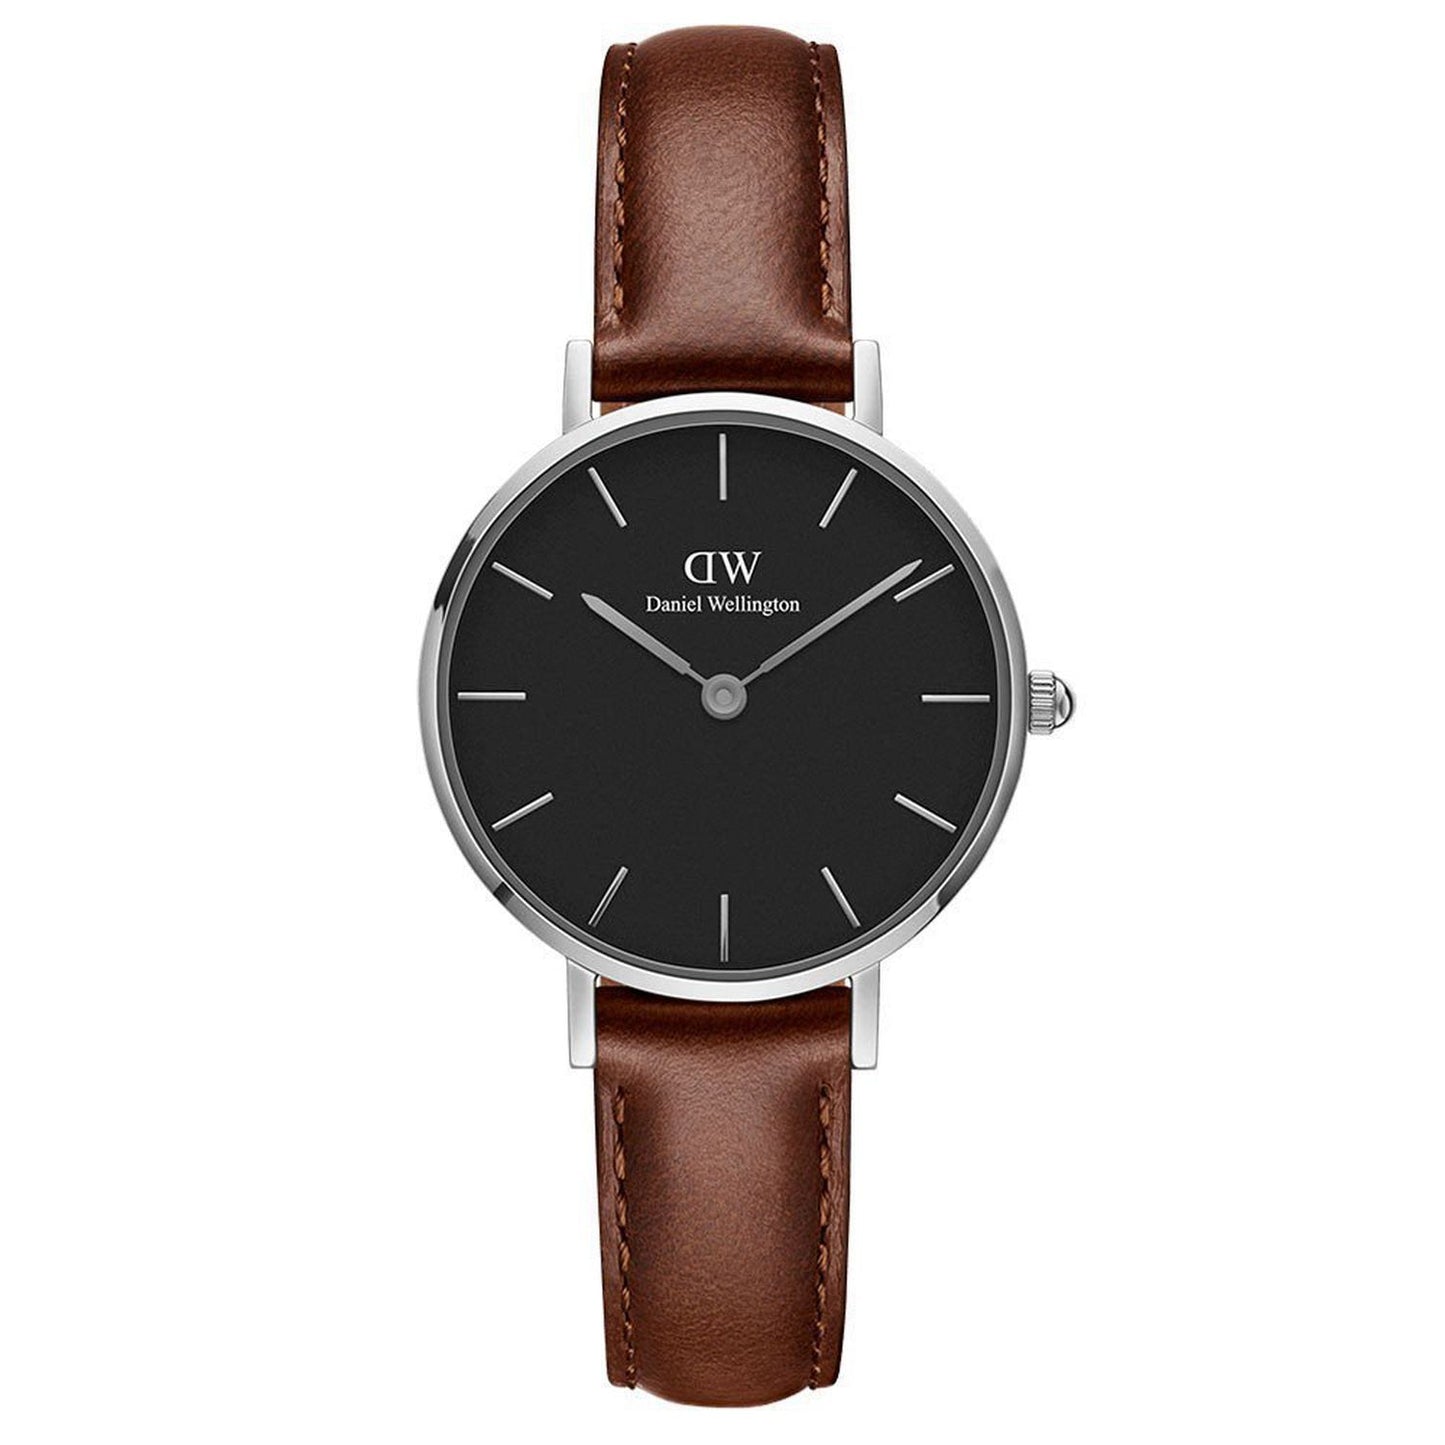 DW Petite ST Mawes 32mm - London Time Watches 